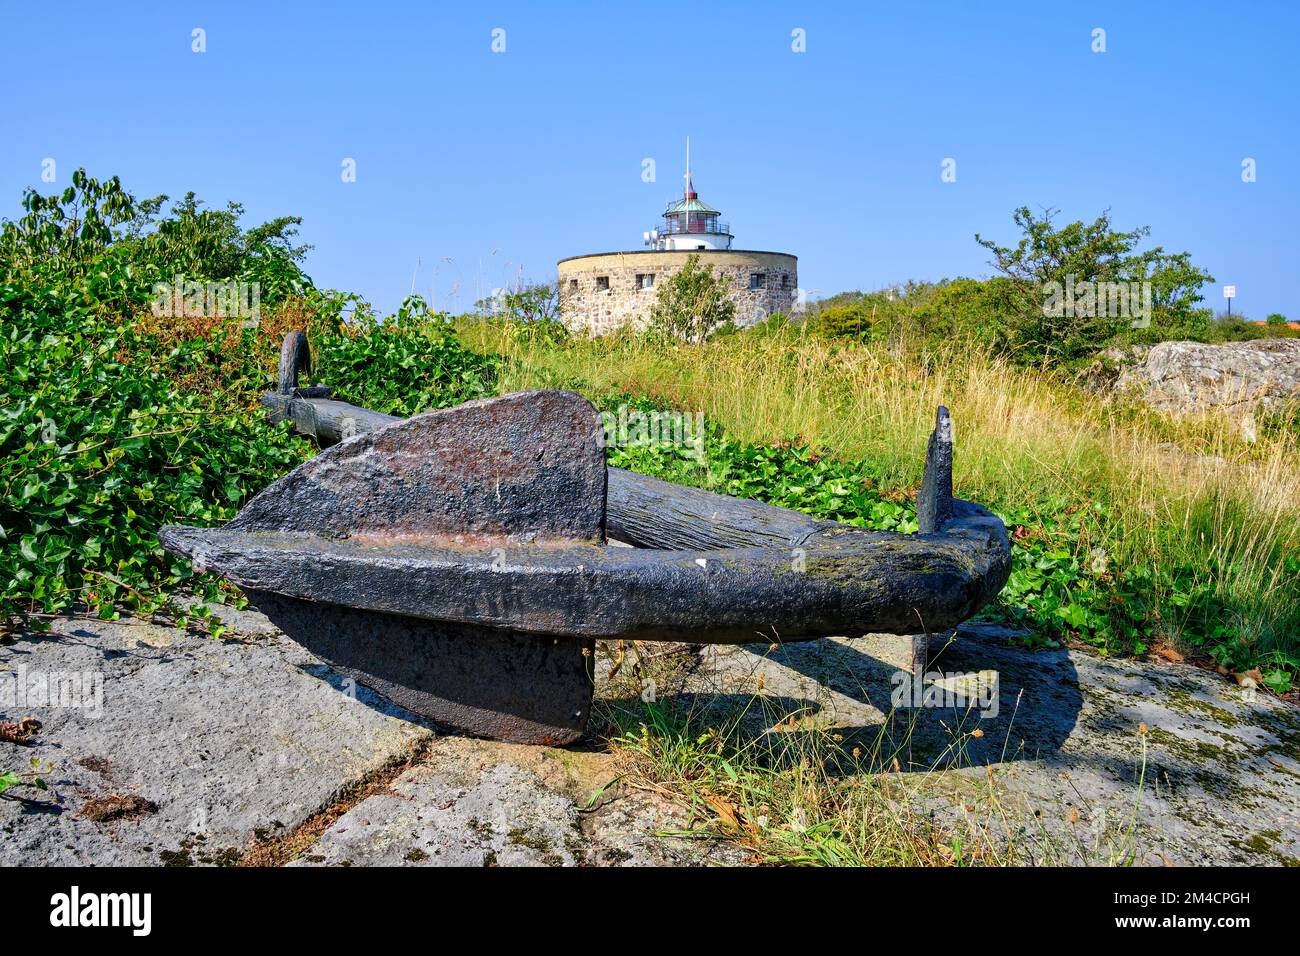 Out and about on the Ertholmen islands, rusty ship's anchor as well as the Great Tower (Store Tårn) and lighthouse,  Christiansö, Ertholmene, Denmark. Stock Photo